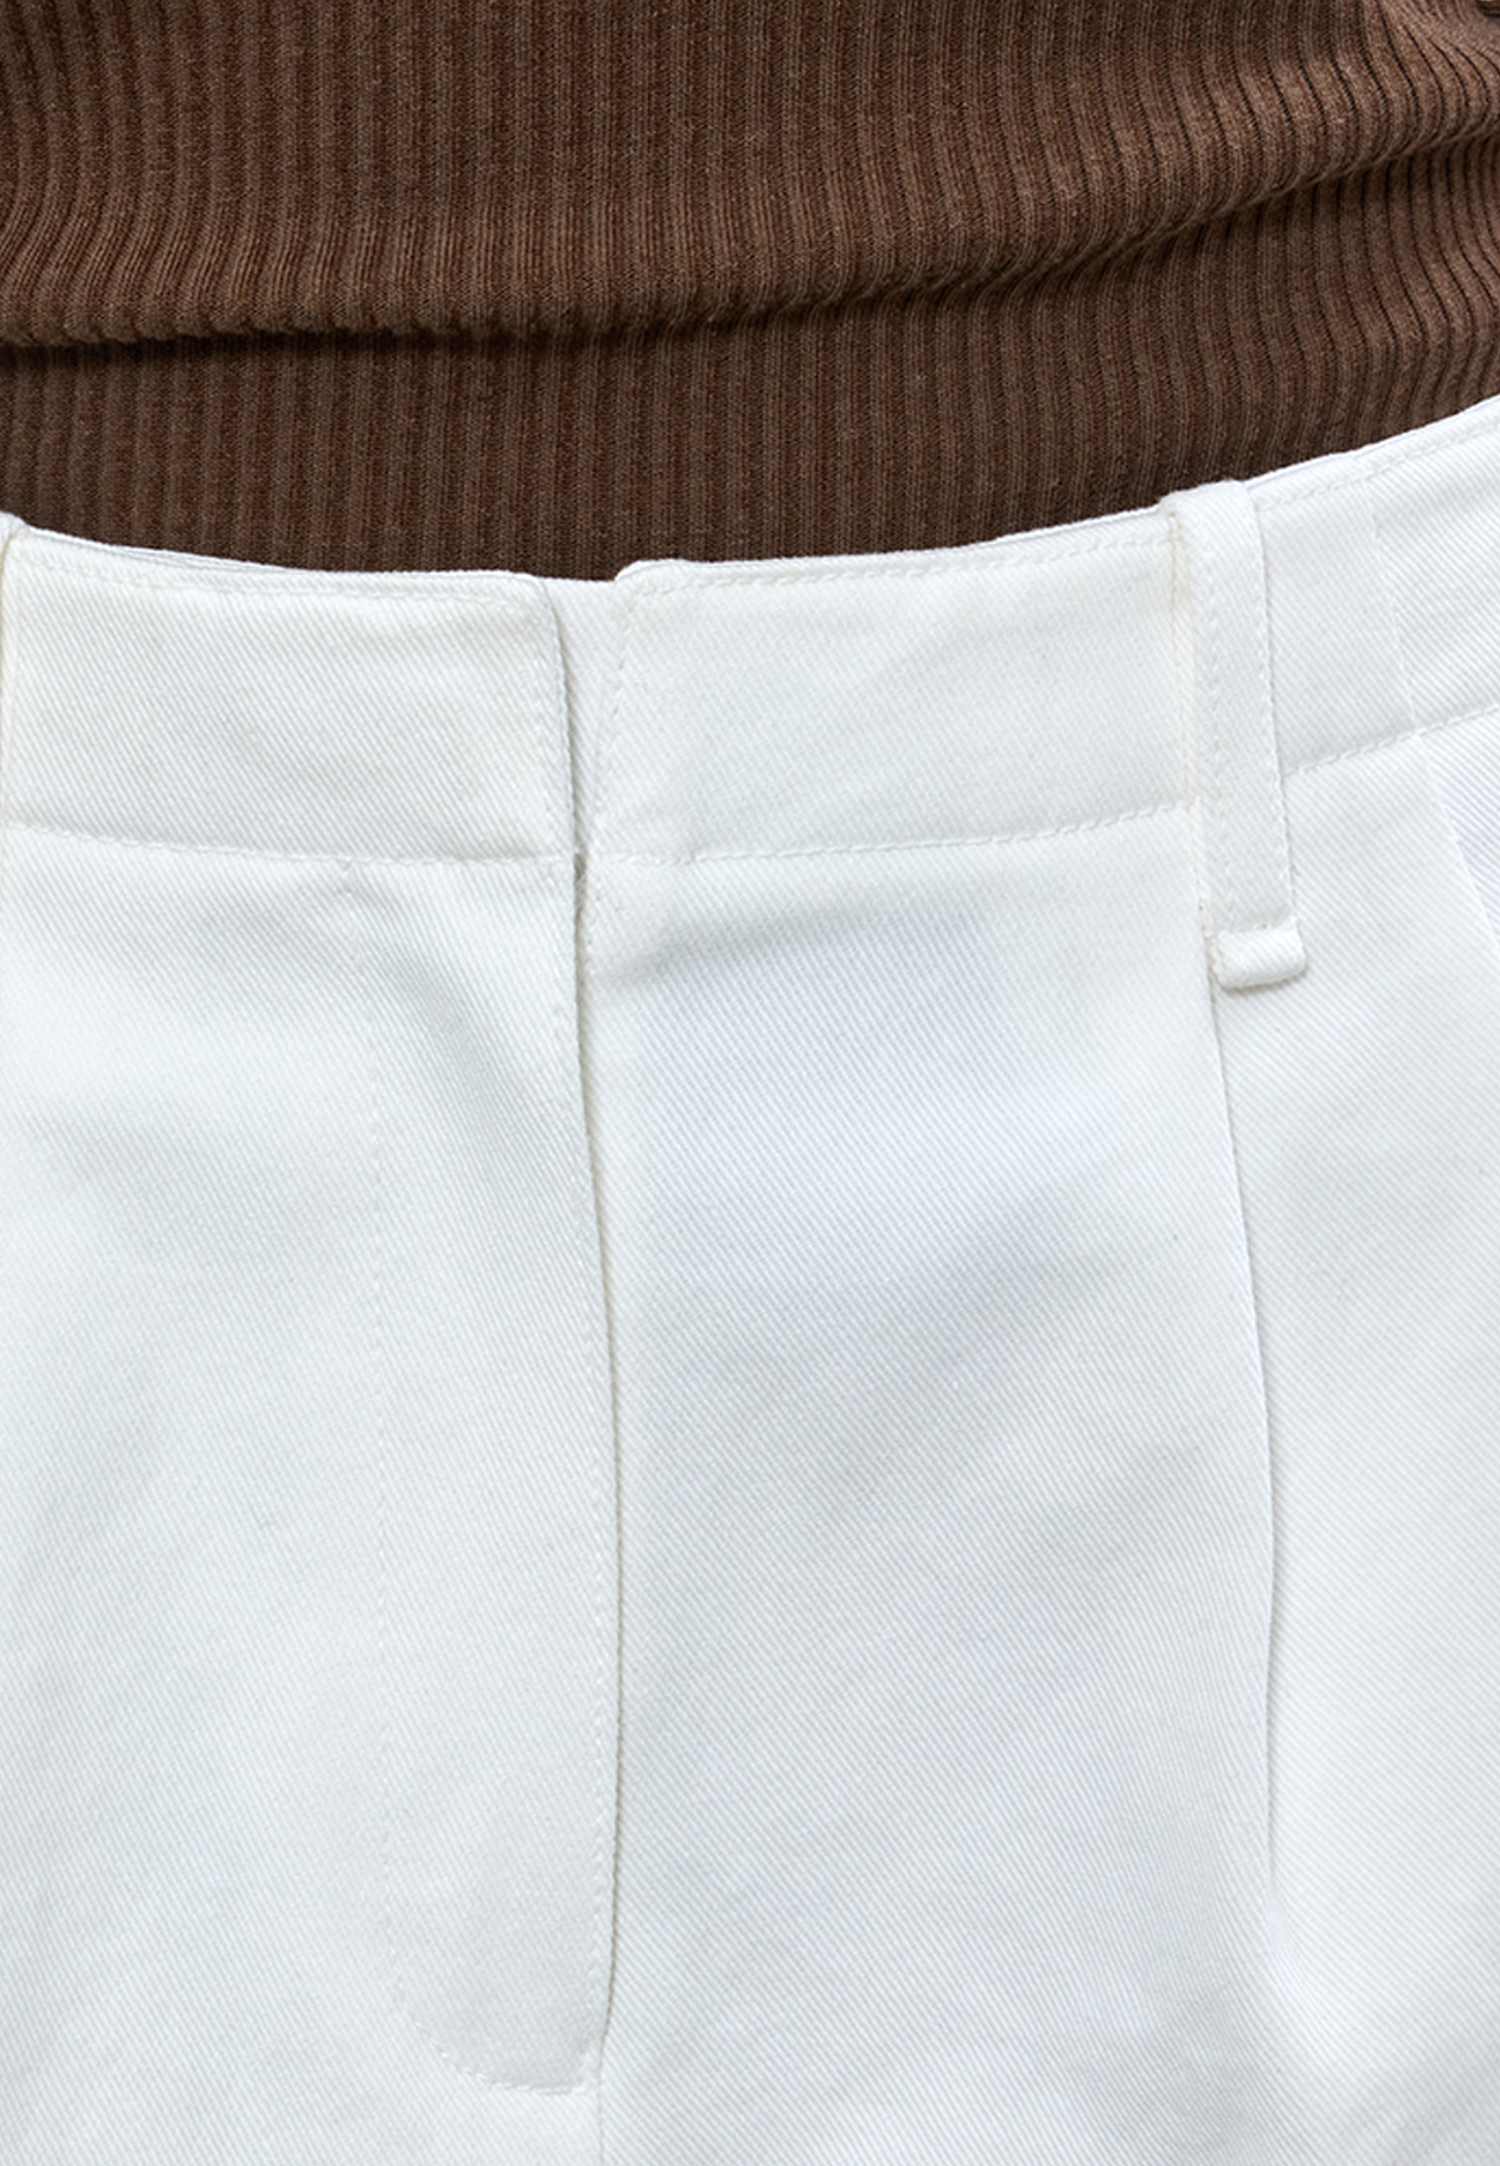 COTTON TWO TUCK SHORT PANTS - IVORY